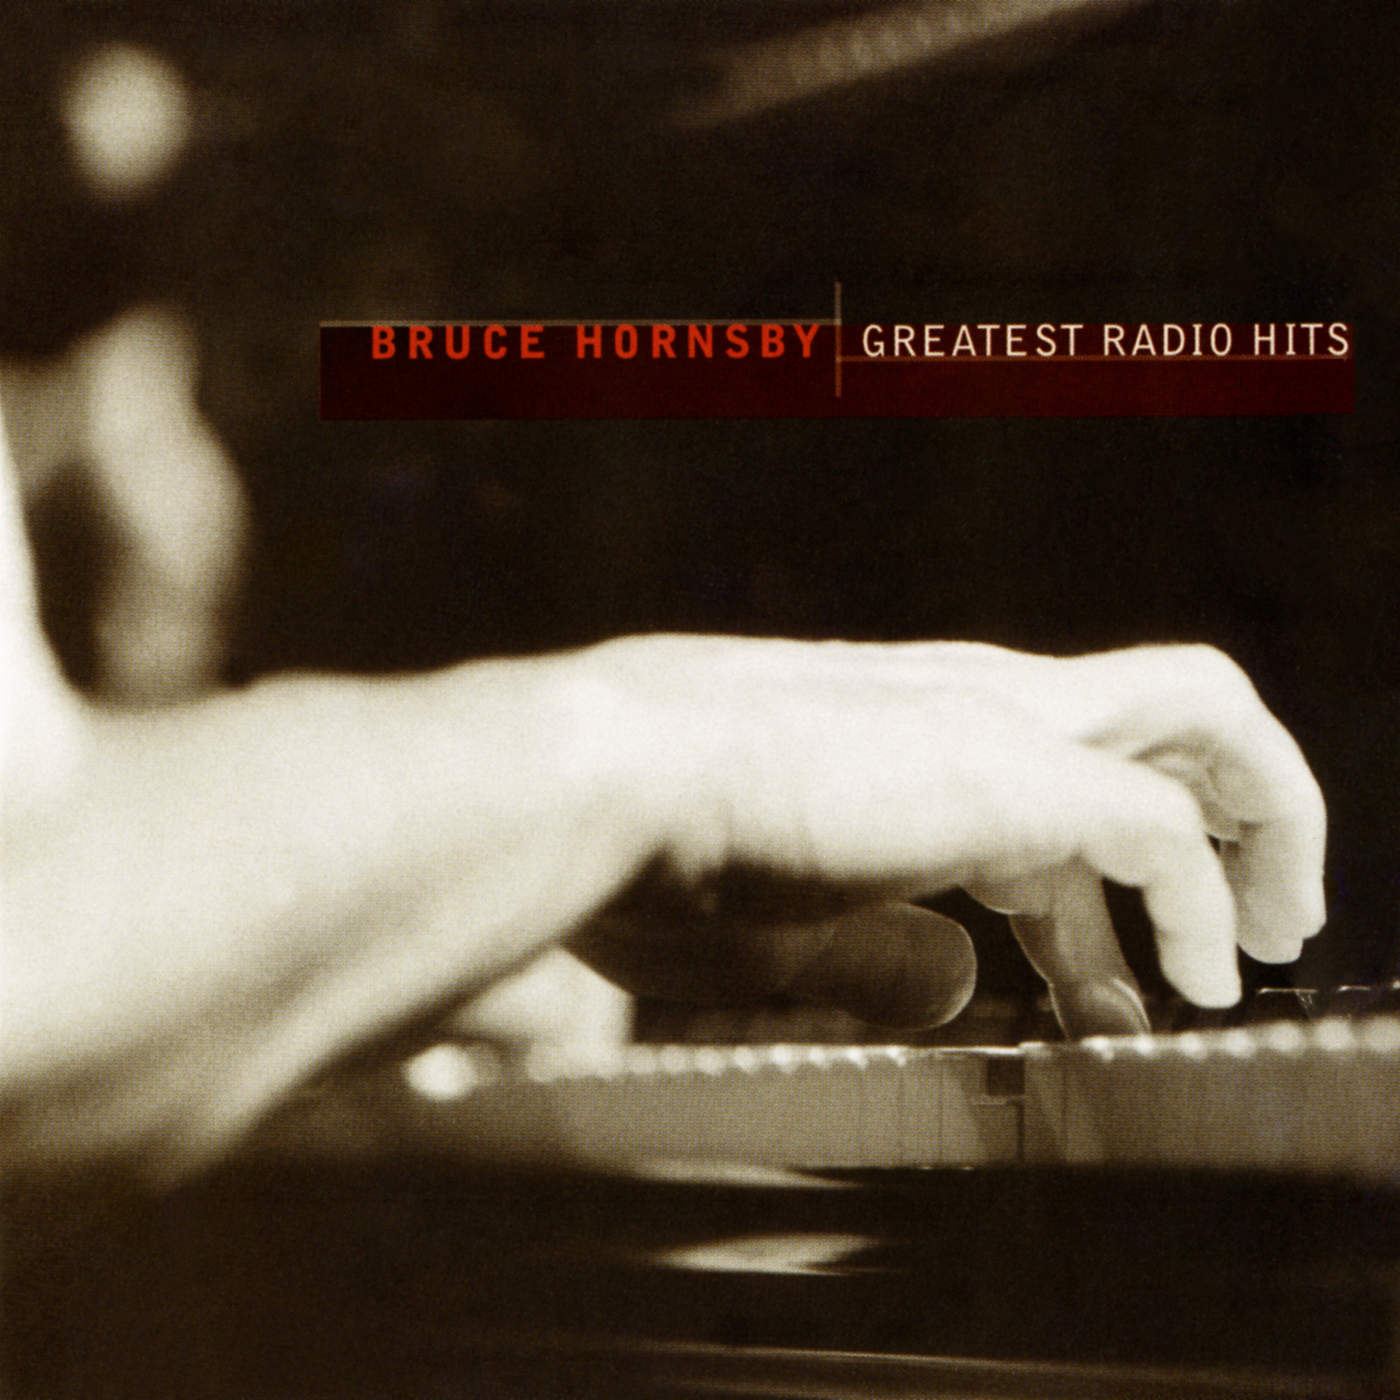 Art for The Way It Is by Bruce Hornsby & The Range